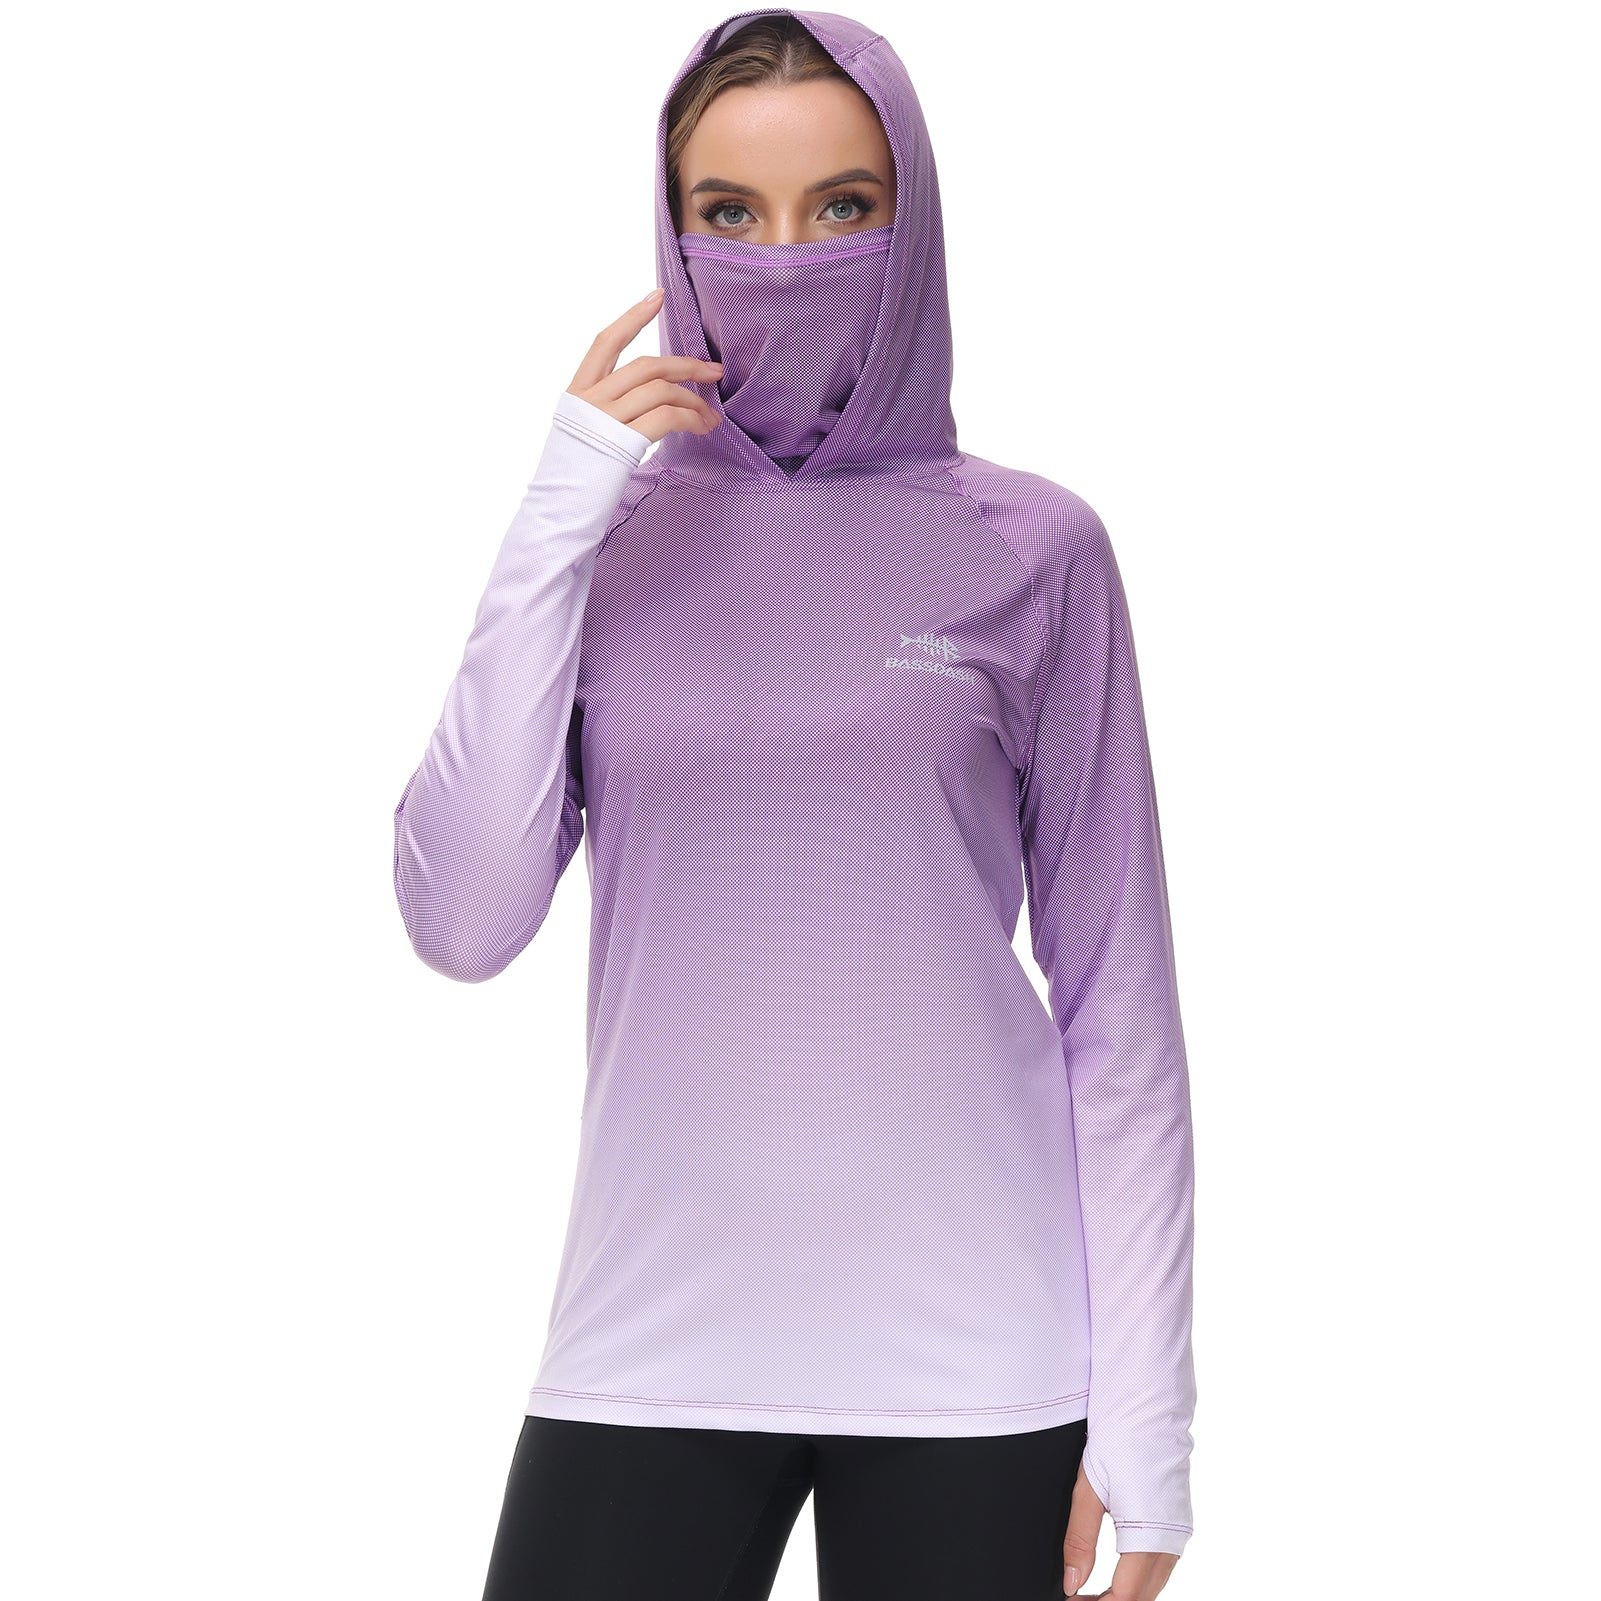 Women's Hooded Fishing Shirt with Face Mask Violet Spot Gradient / Small